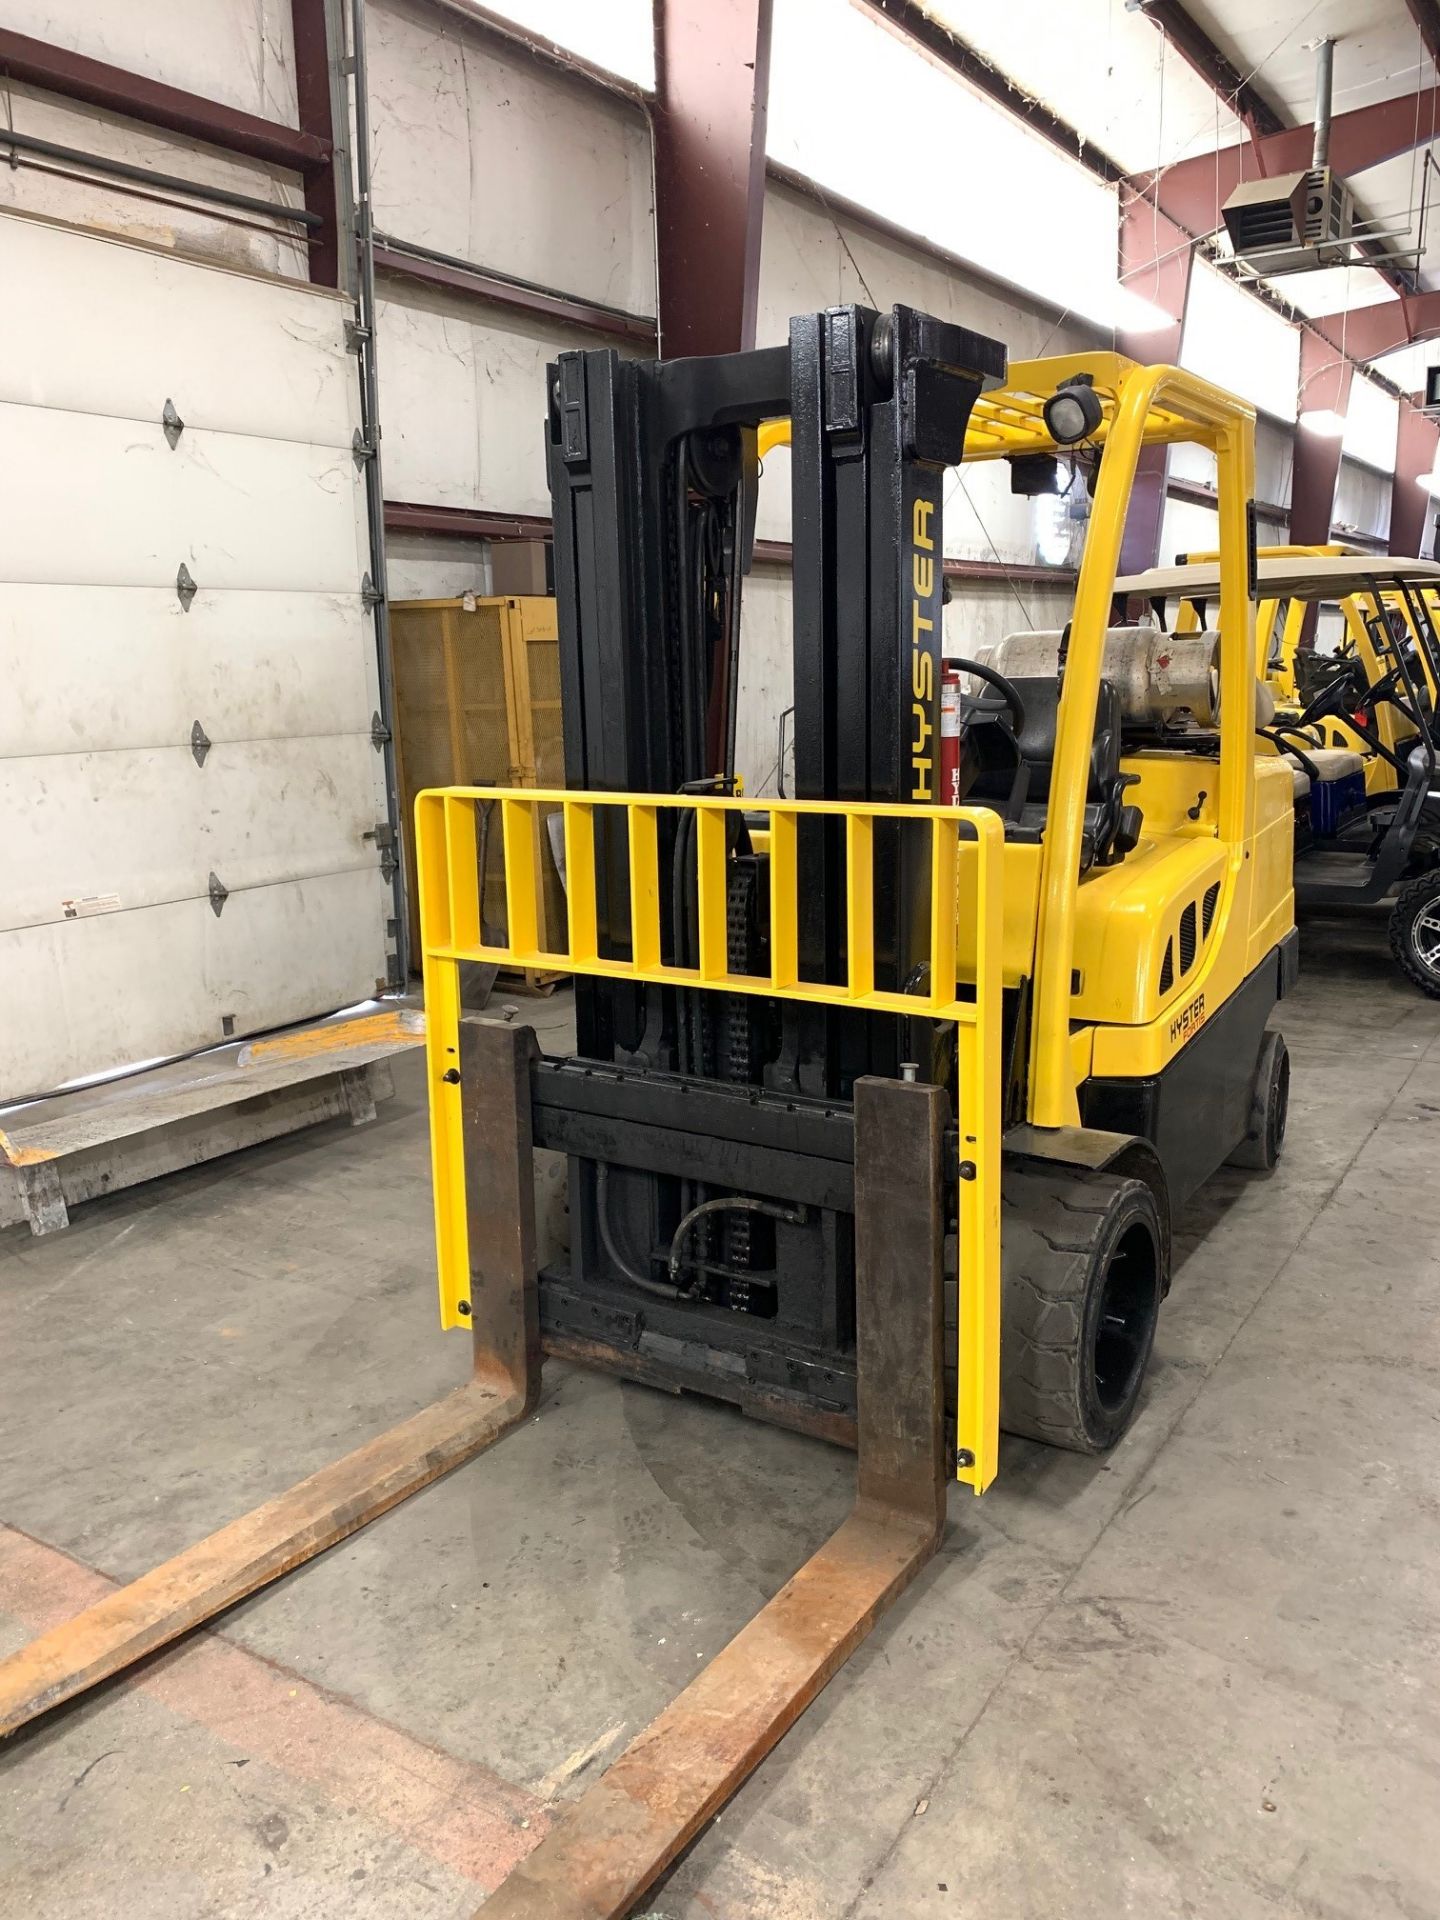 2011 HYSTER 10,000 LB., MODEL: S100FT, S/N: G004V05411J, LPG, LEVER SHIFT, SOLID TIRES, 163” - Image 2 of 5